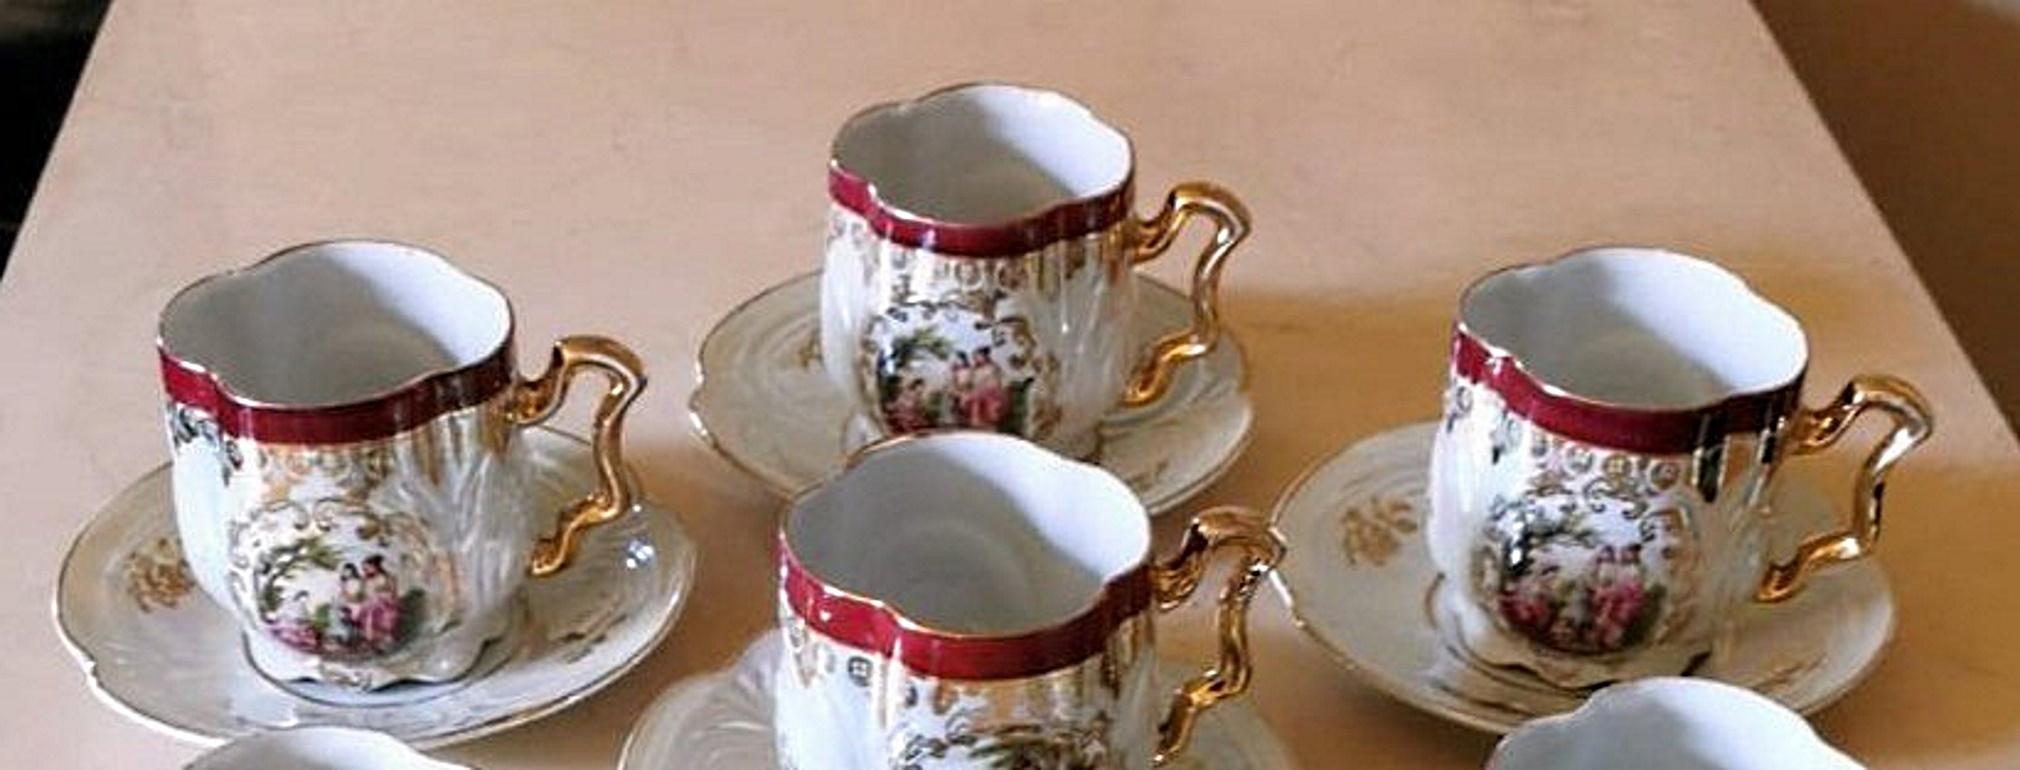 father brown tea set for sale